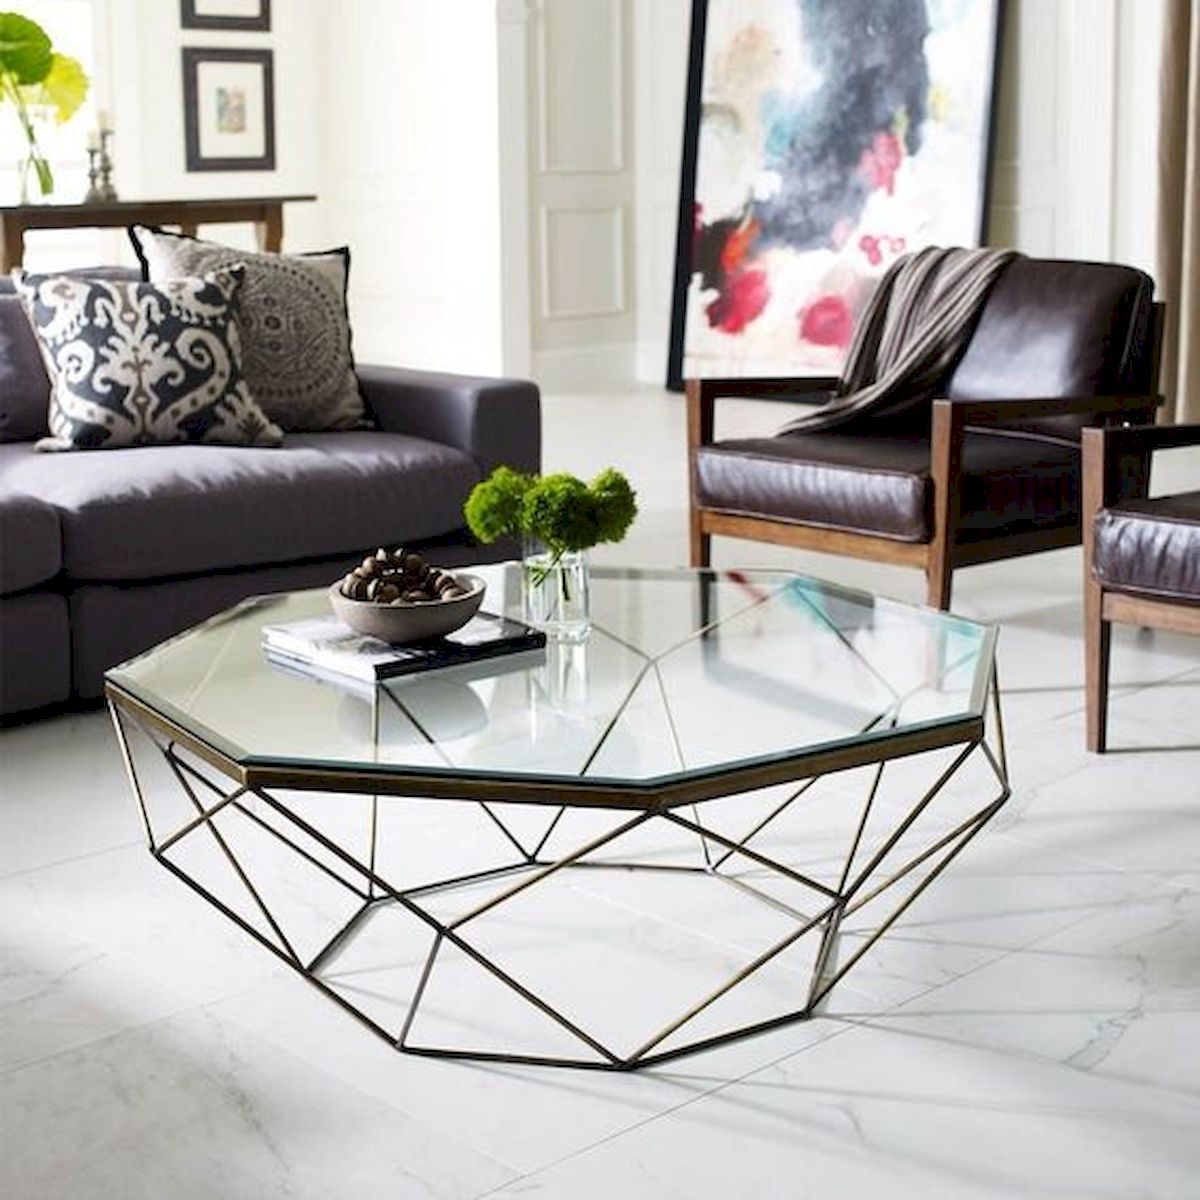 40 Awesome Modern Glass Coffee Table Design Ideas For Your Living Room (30)